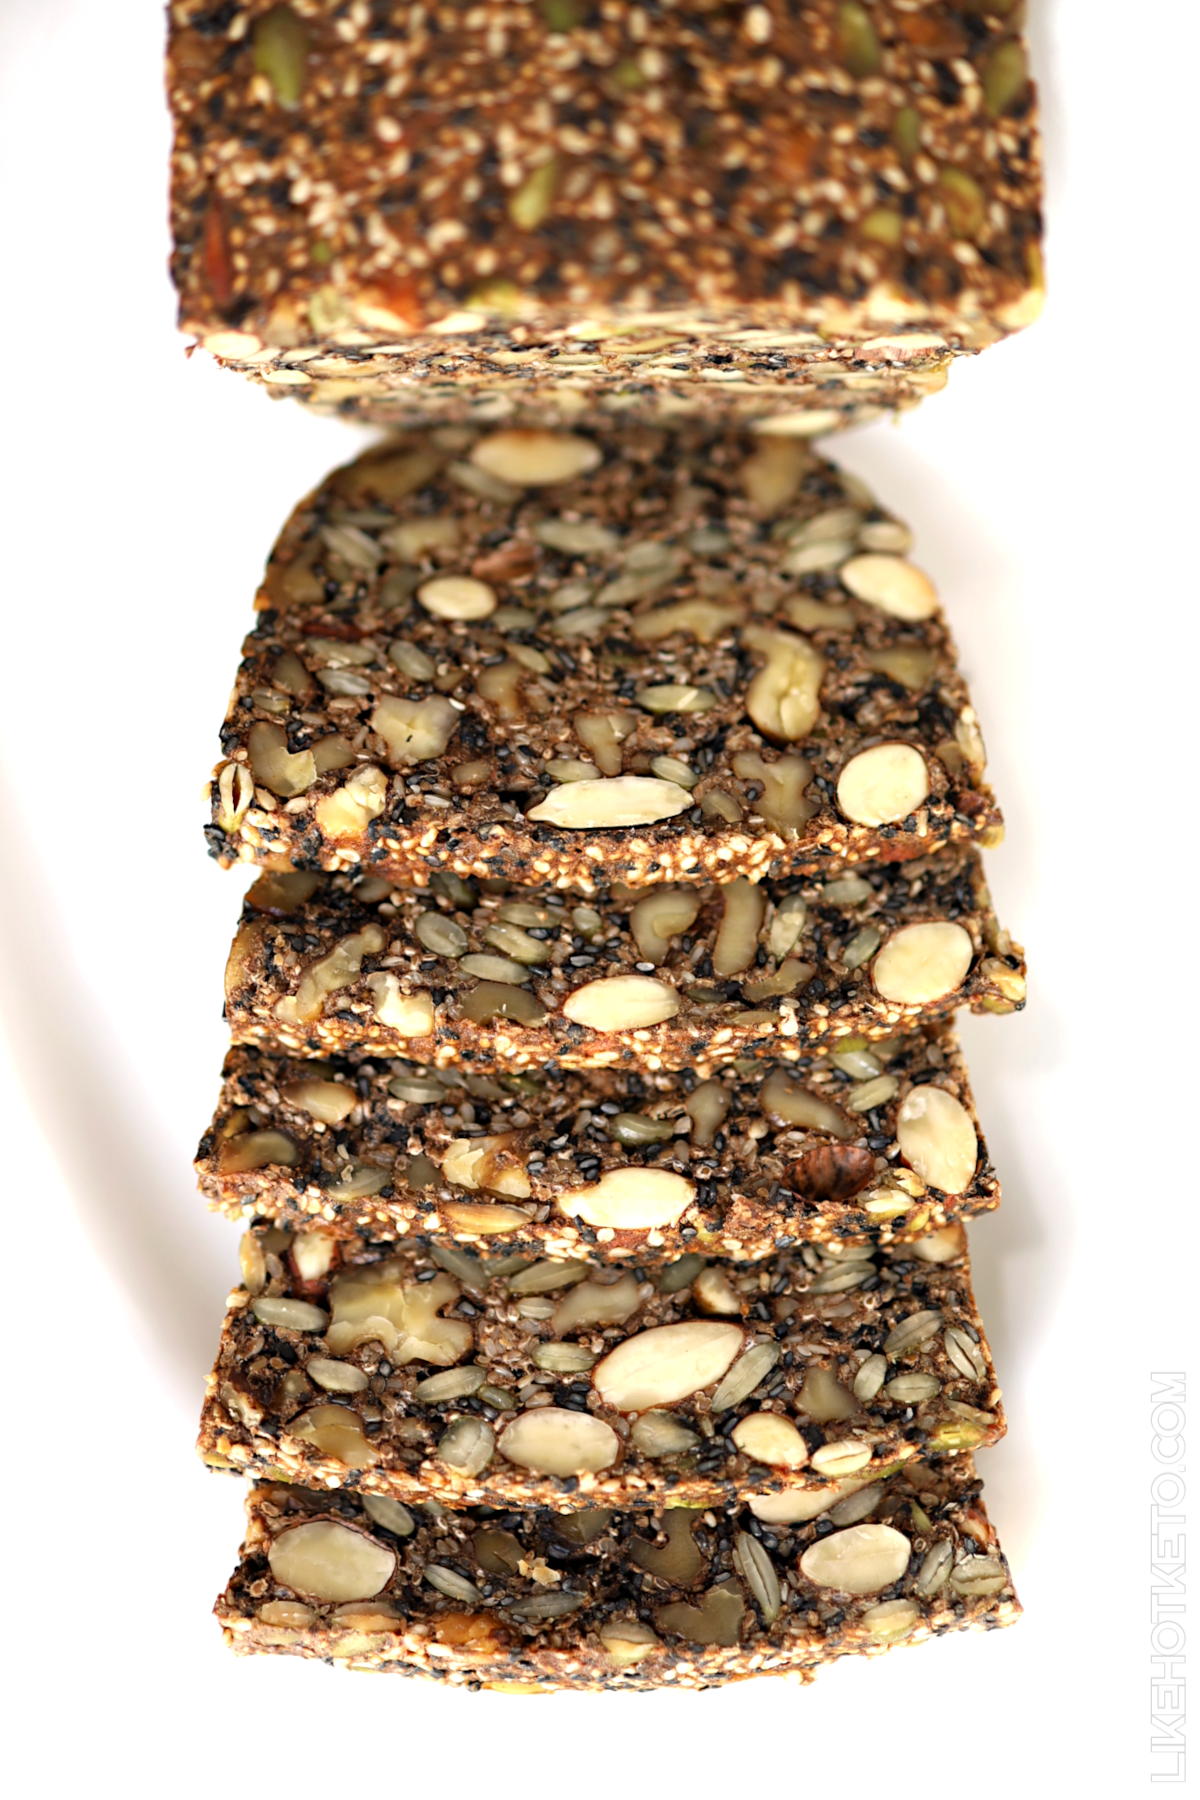 Sliced loaf of gluten-free nut and seed bread.